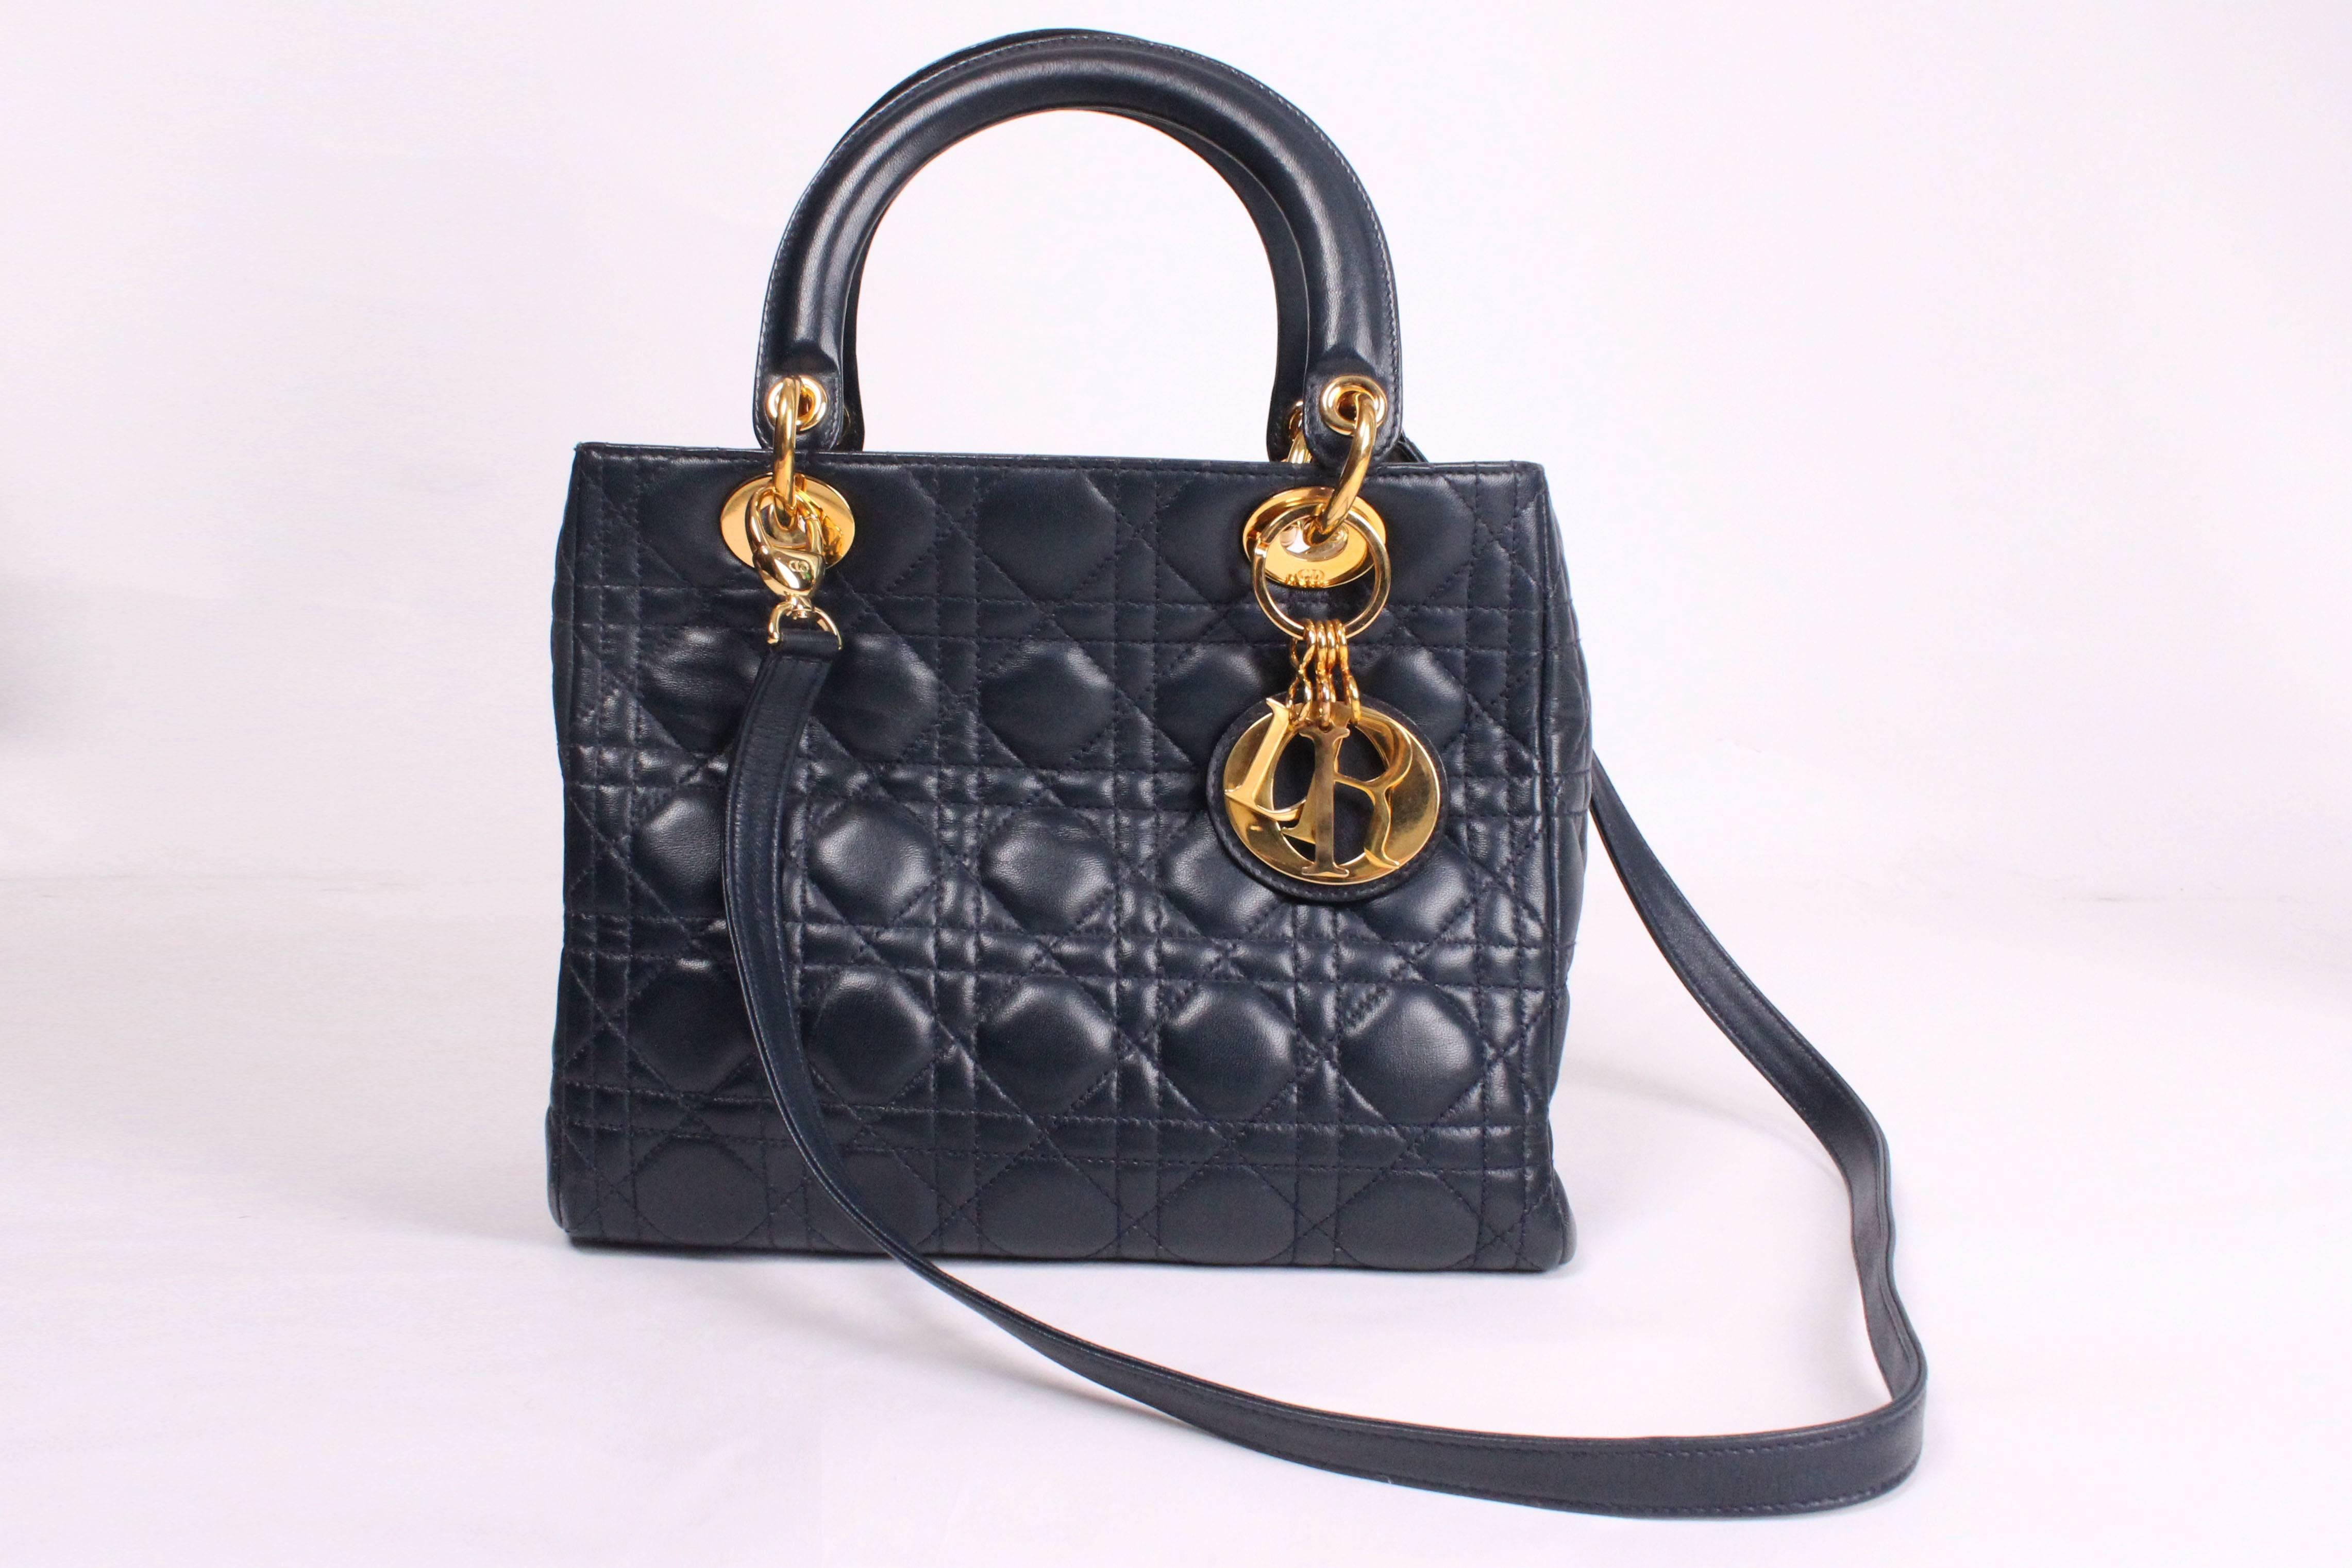 A chic Dior D bag in navy blue leather. This bag is in excellent condition, and has all the original hardwear. The bag is lined in red,and has an internal zip pocket, and detachable 35''shoulder strap.The bag has a top central zip closure.